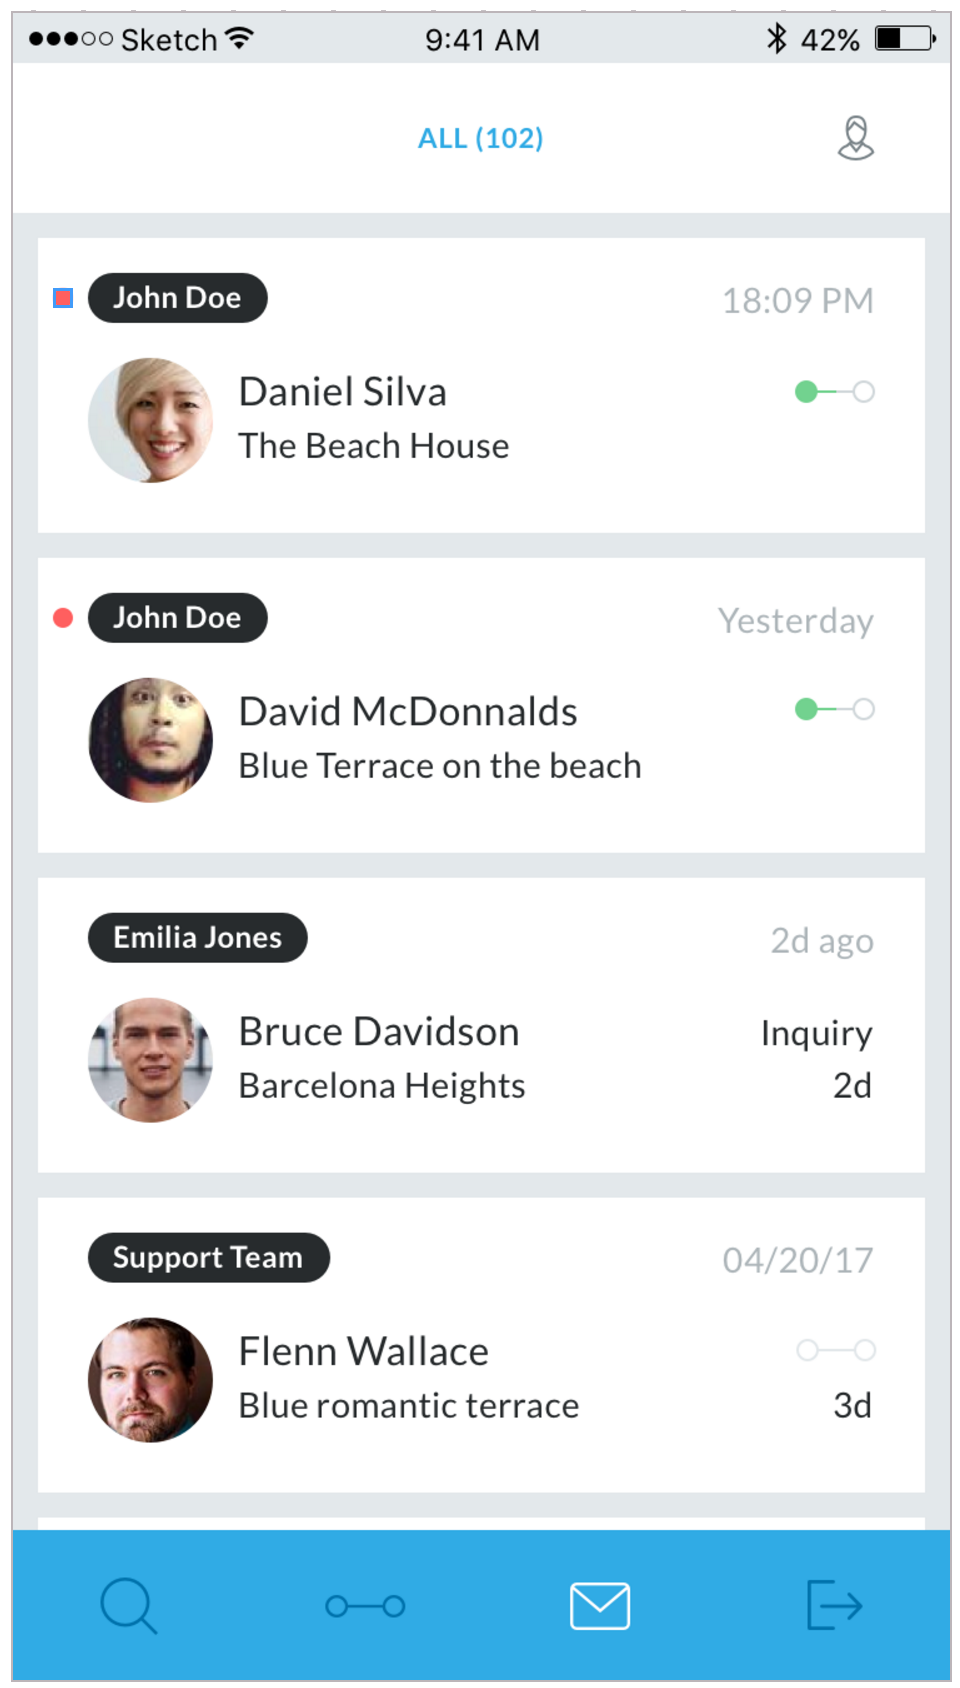 Guesty Software - The inbox shows all conversations with guests